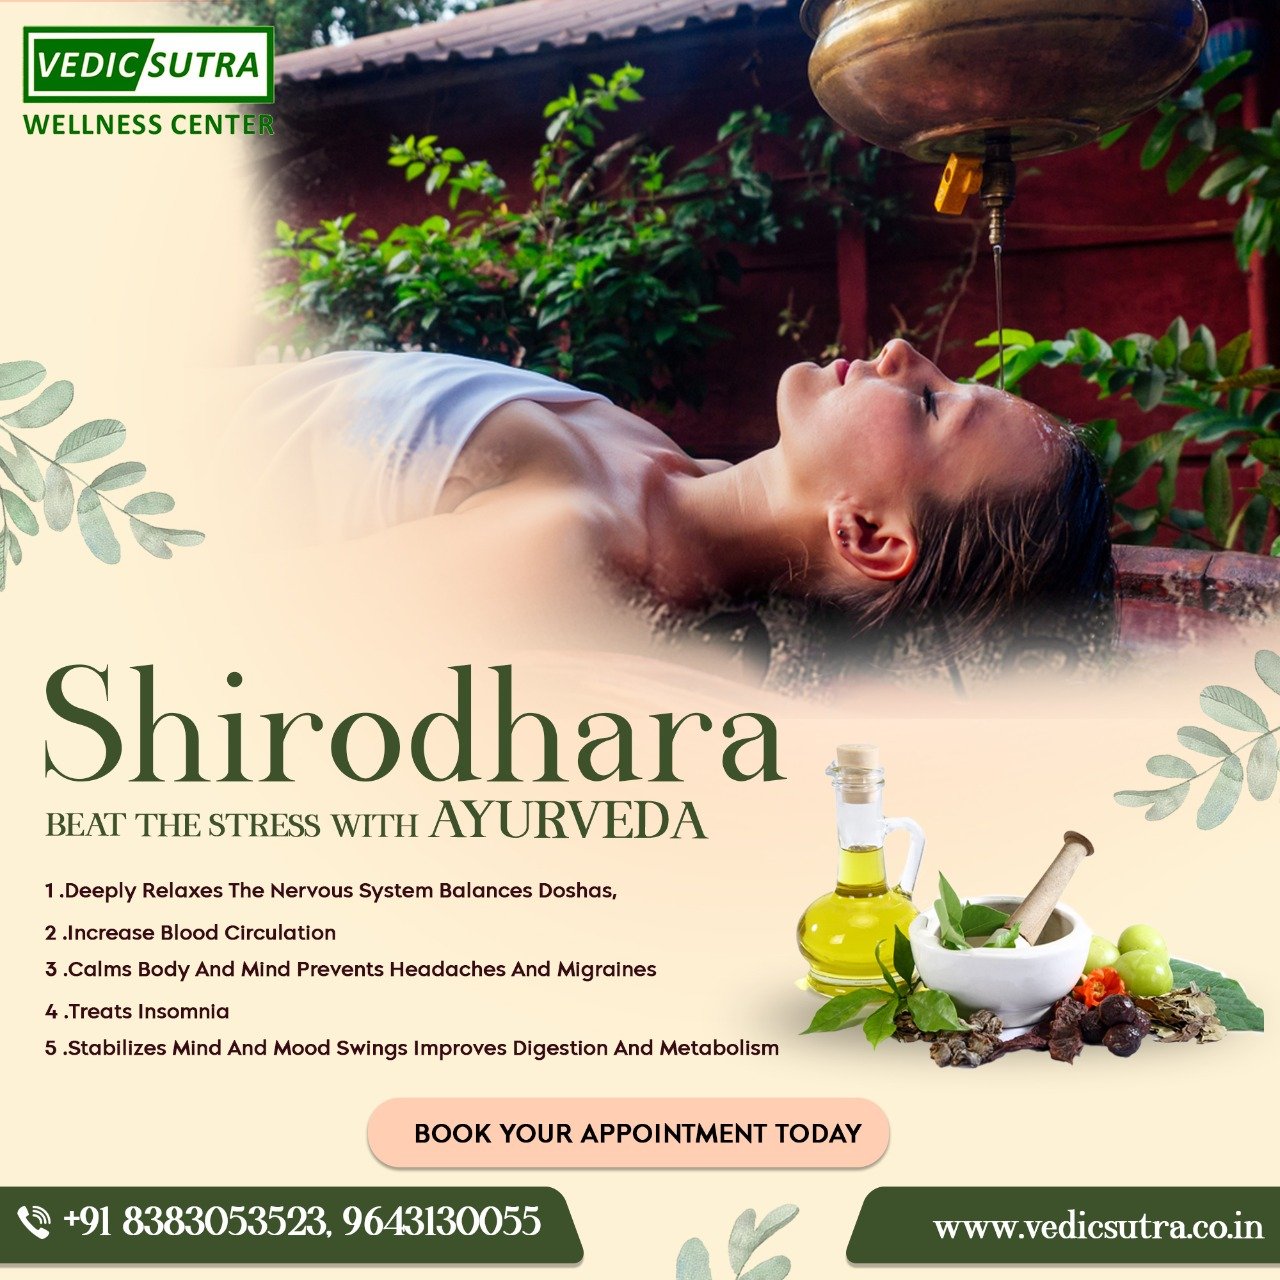 Shirodhara treatment is a traditional Ayurvedic therapy.